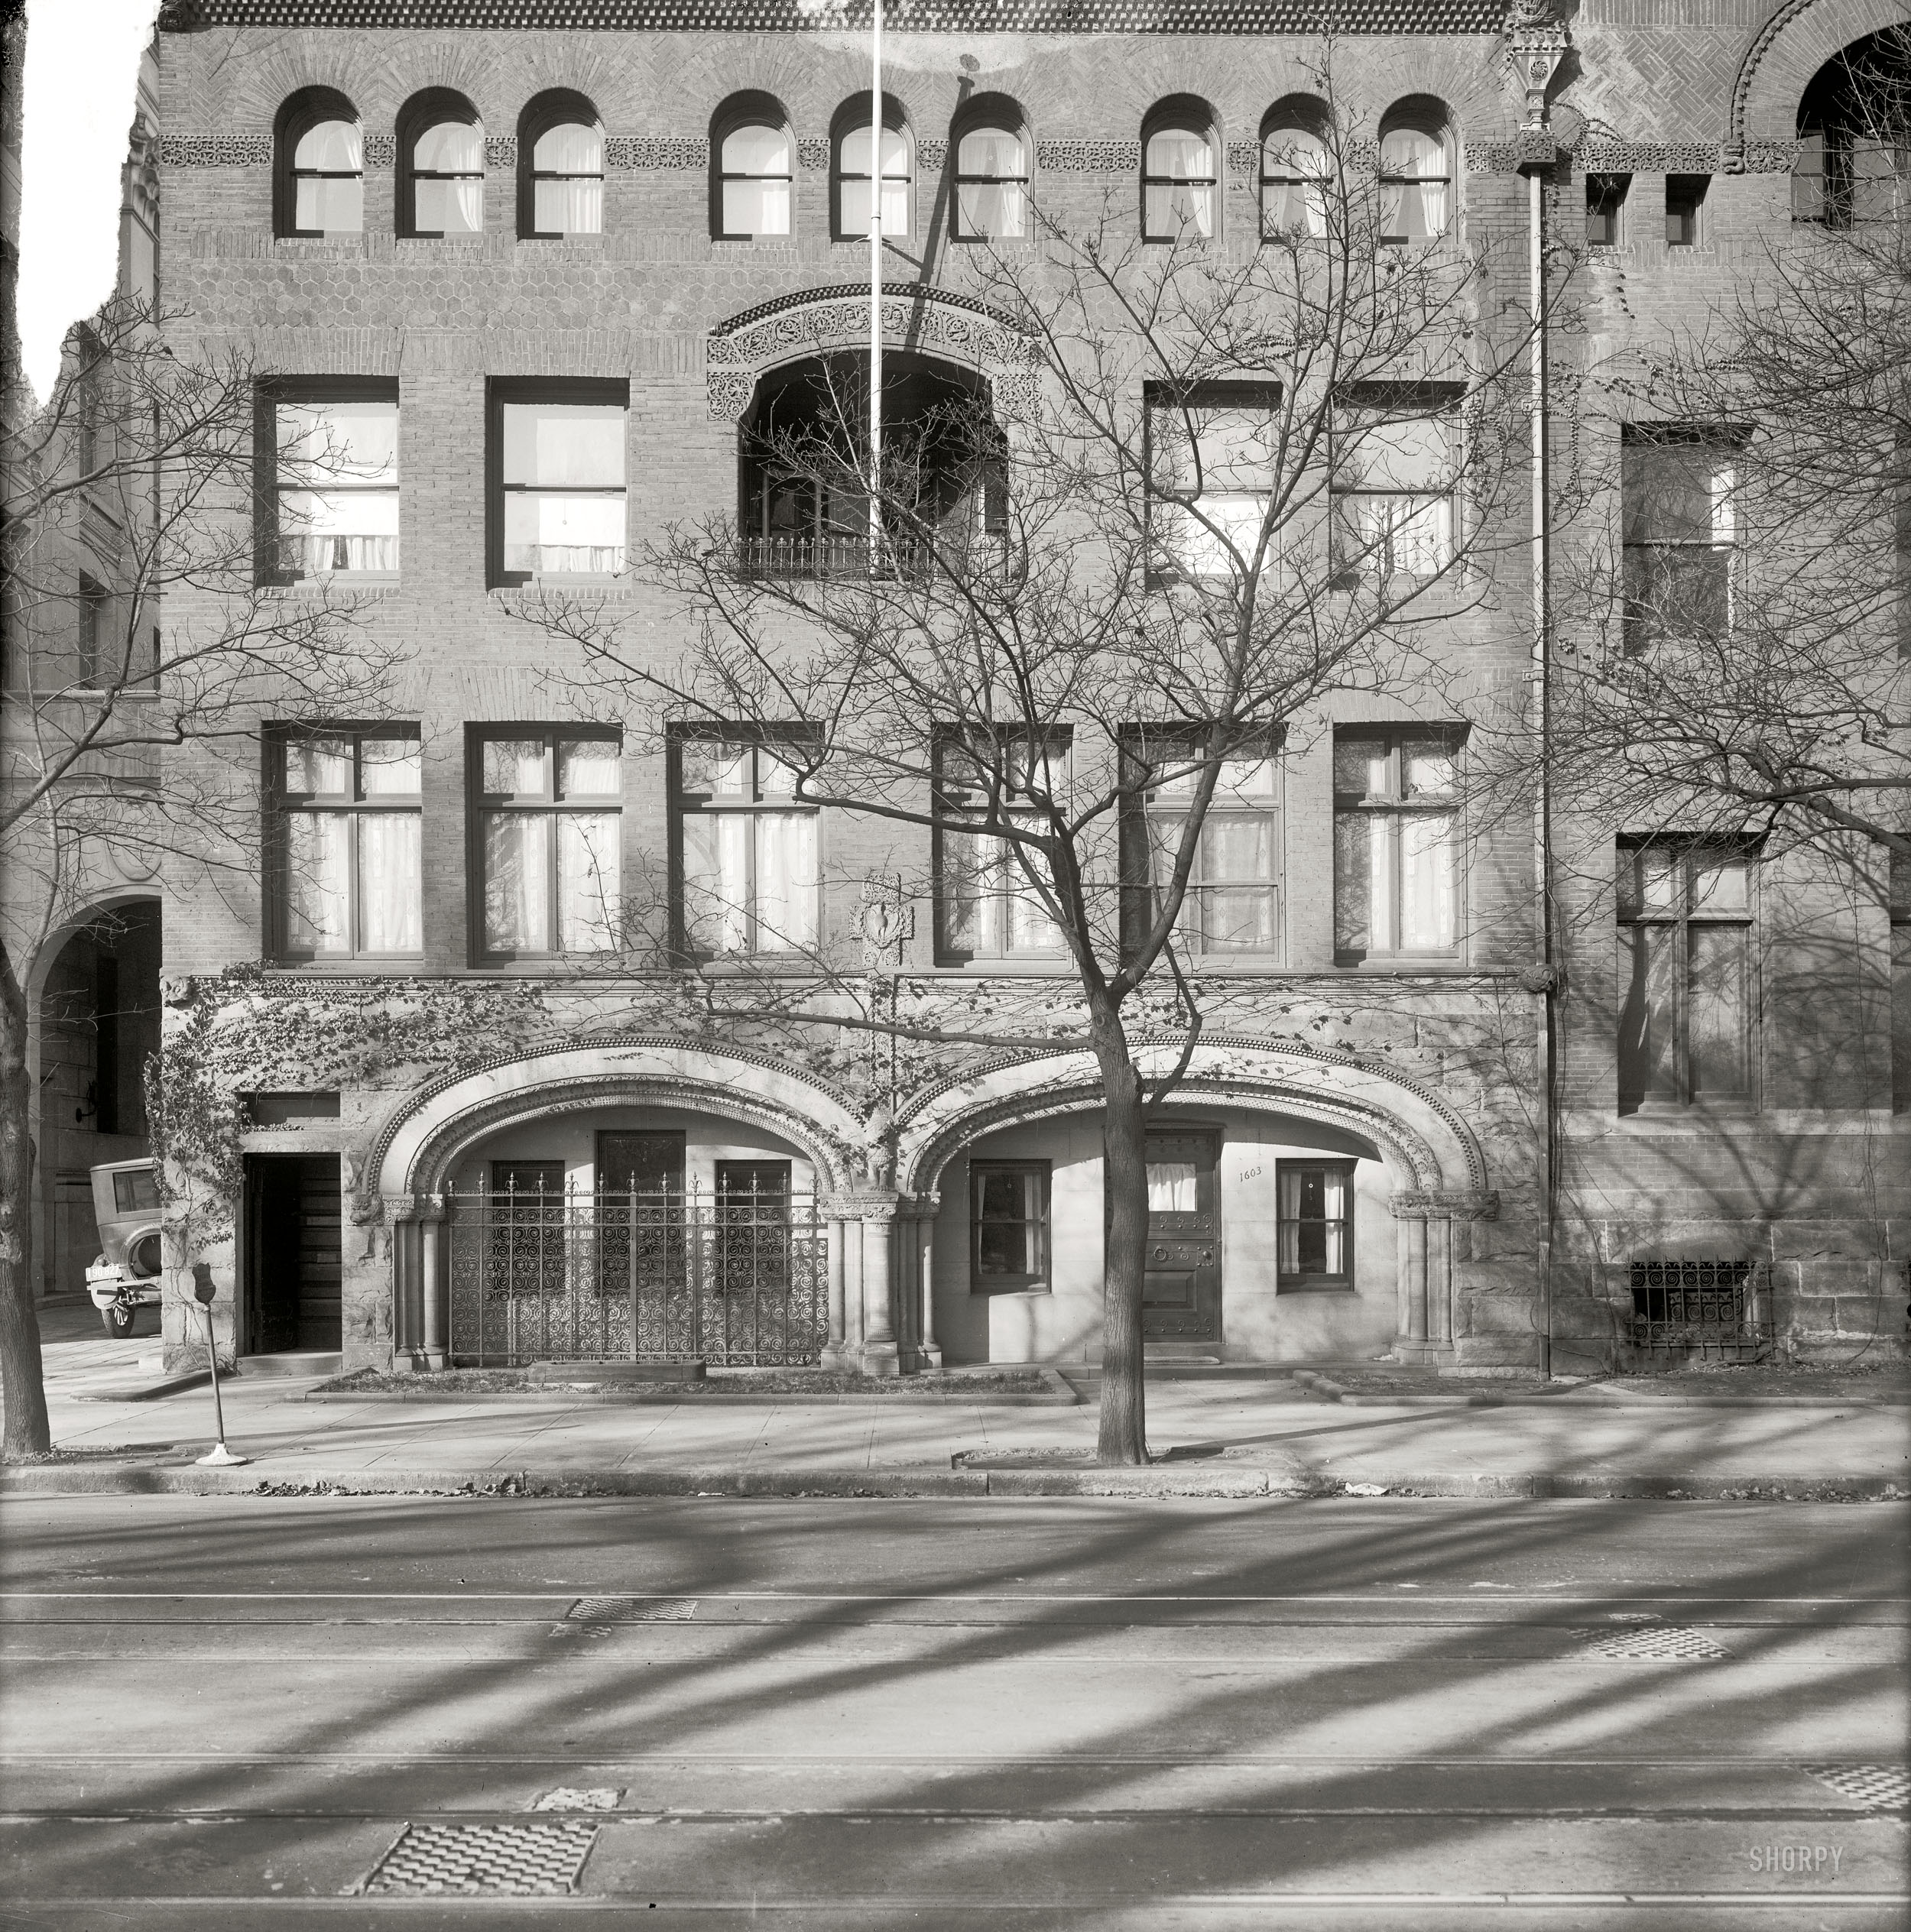 Washington, D.C., 1925. "Brazilian Embassy, Henry Adams House, 1603 H Street N.W." In the late 1920s the house was razed and replaced by the Hay-Adams Hotel. Harris & Ewing Collection glass negative. View full size.